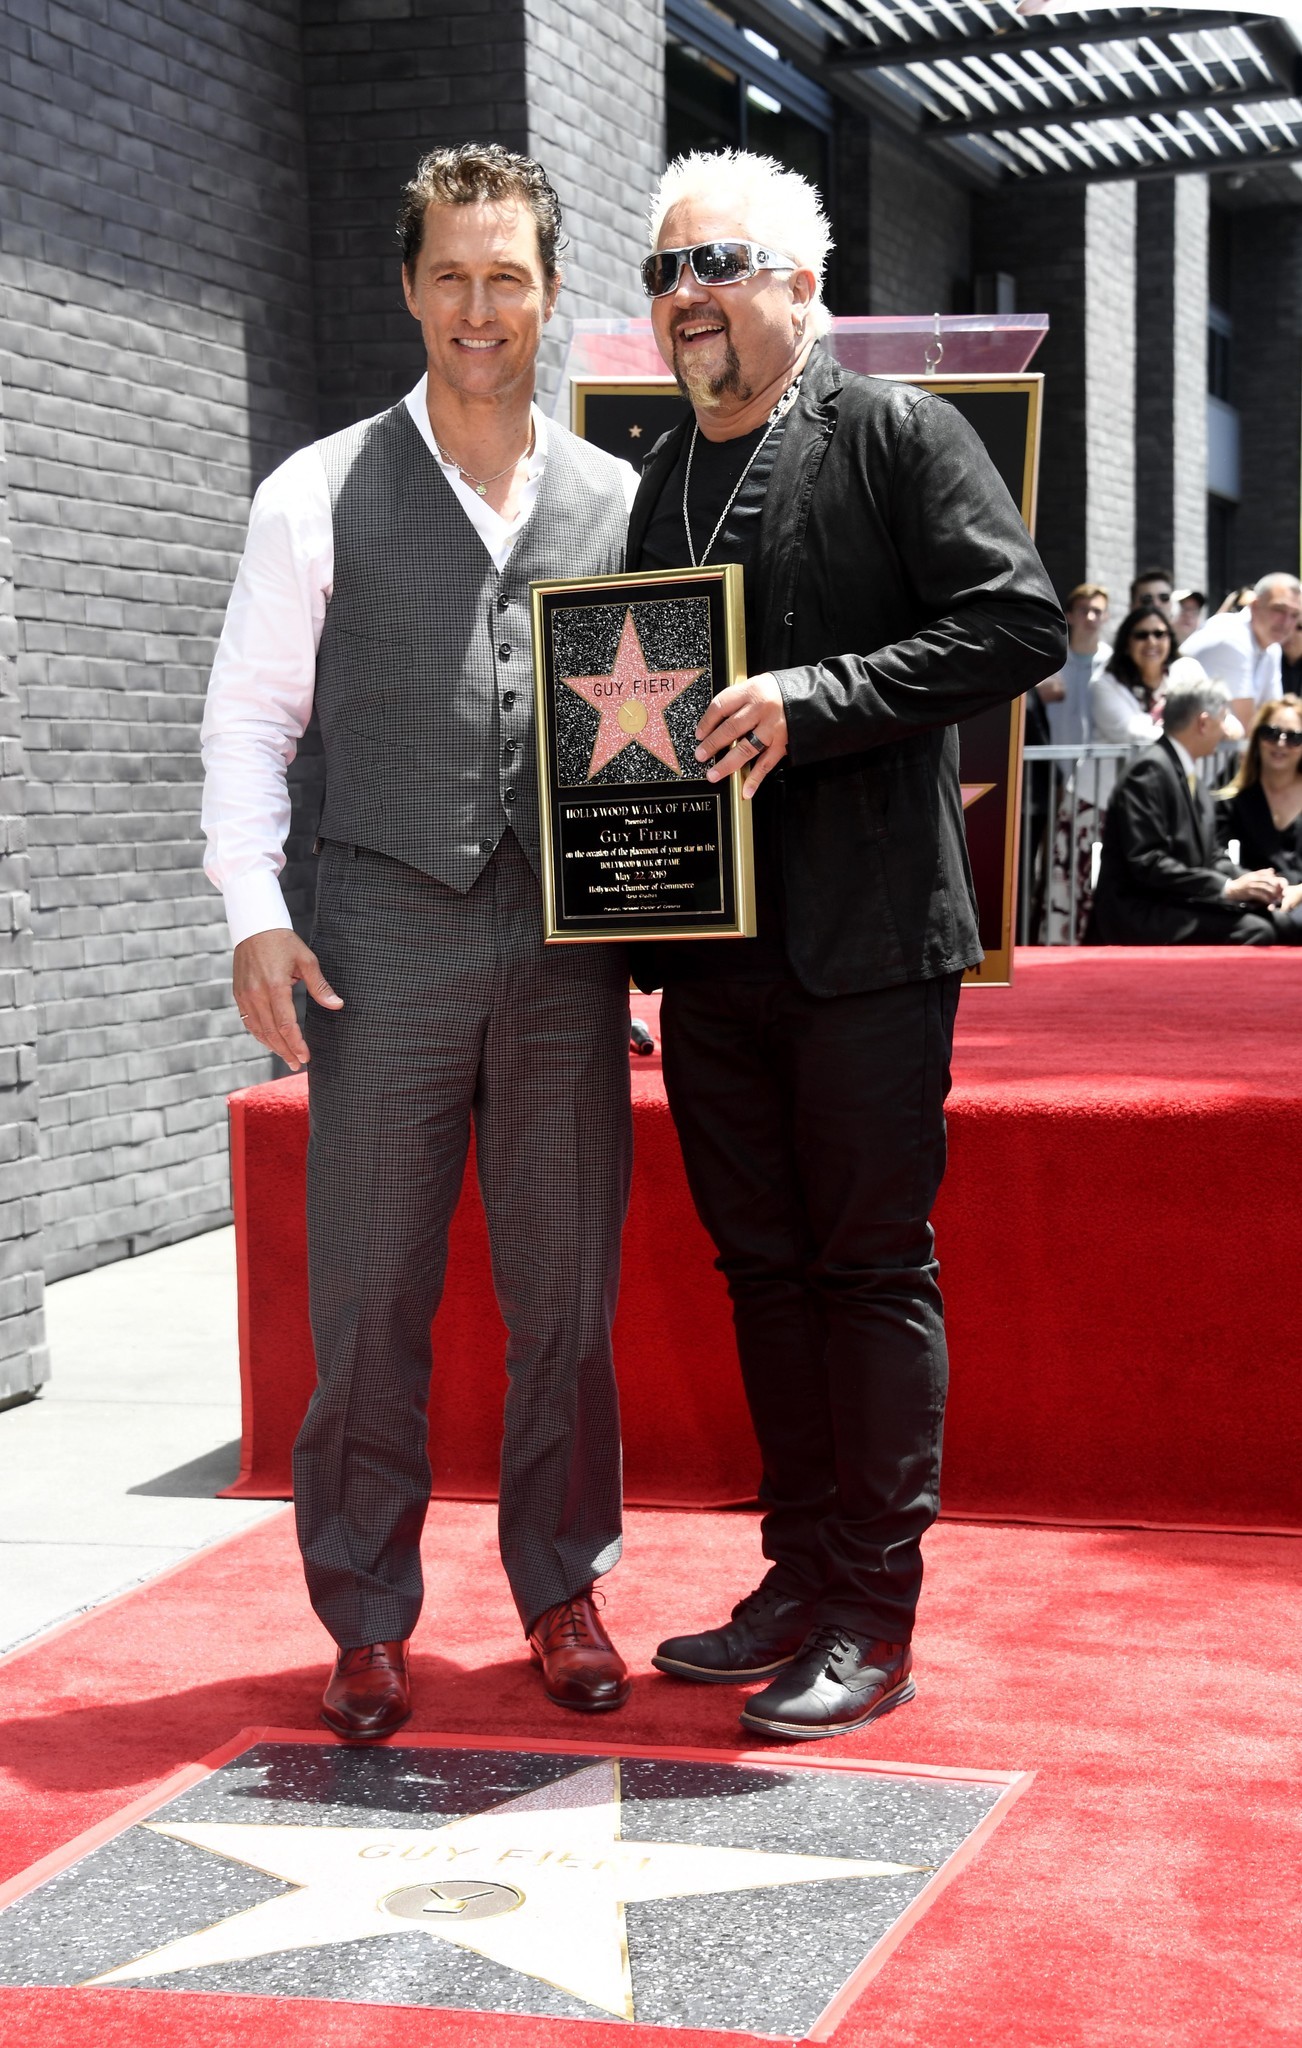 Matthew McConaughey spoke at Guy Fieri's Hollywood Walk of Fame ceremony. The chef and 